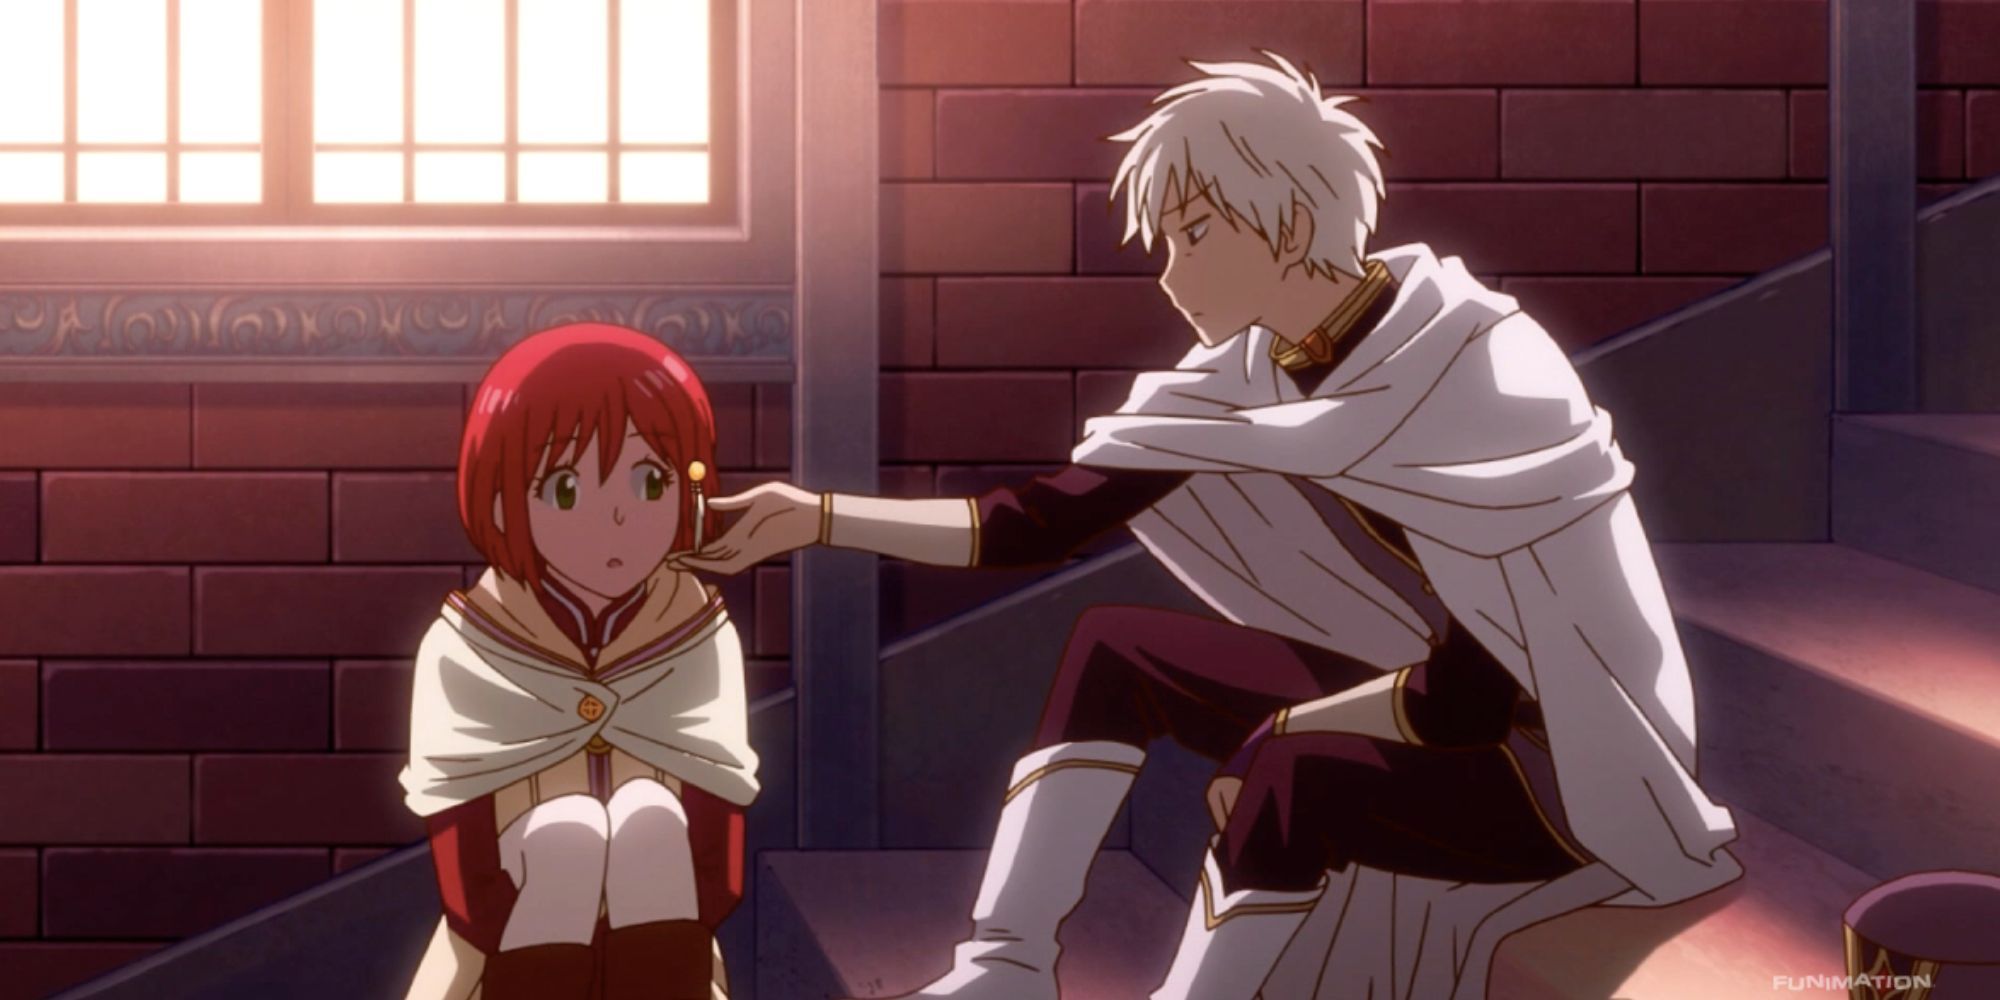 a white haired prince reaches out to touch the hair of a red-headed girl